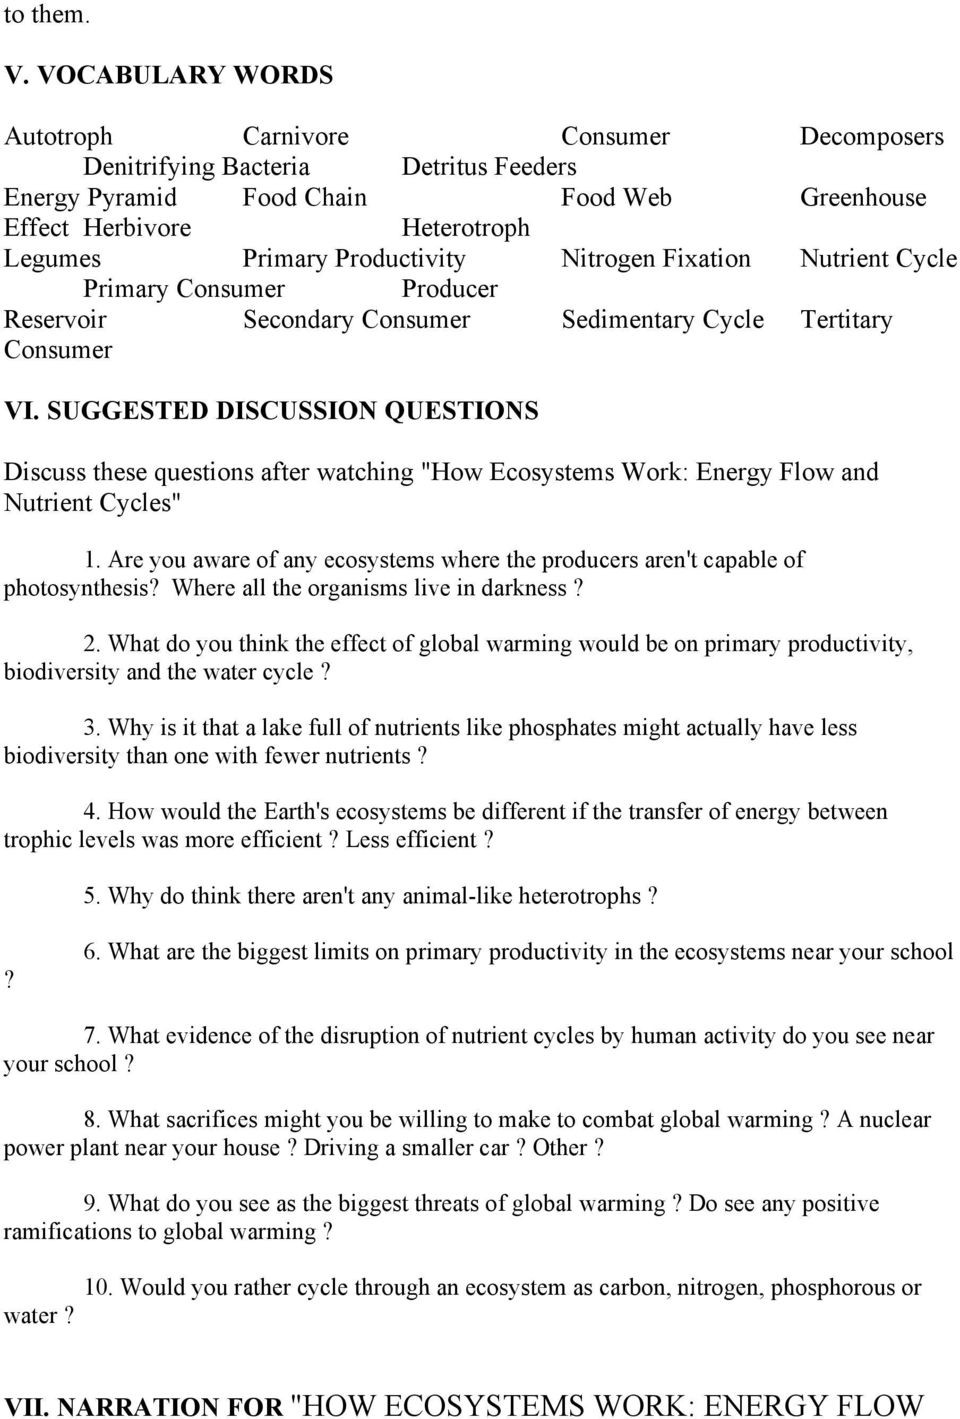 Nutrient Cycles Worksheet Answers How Ecosystems Work Energy Flow and Nutrient Cycles